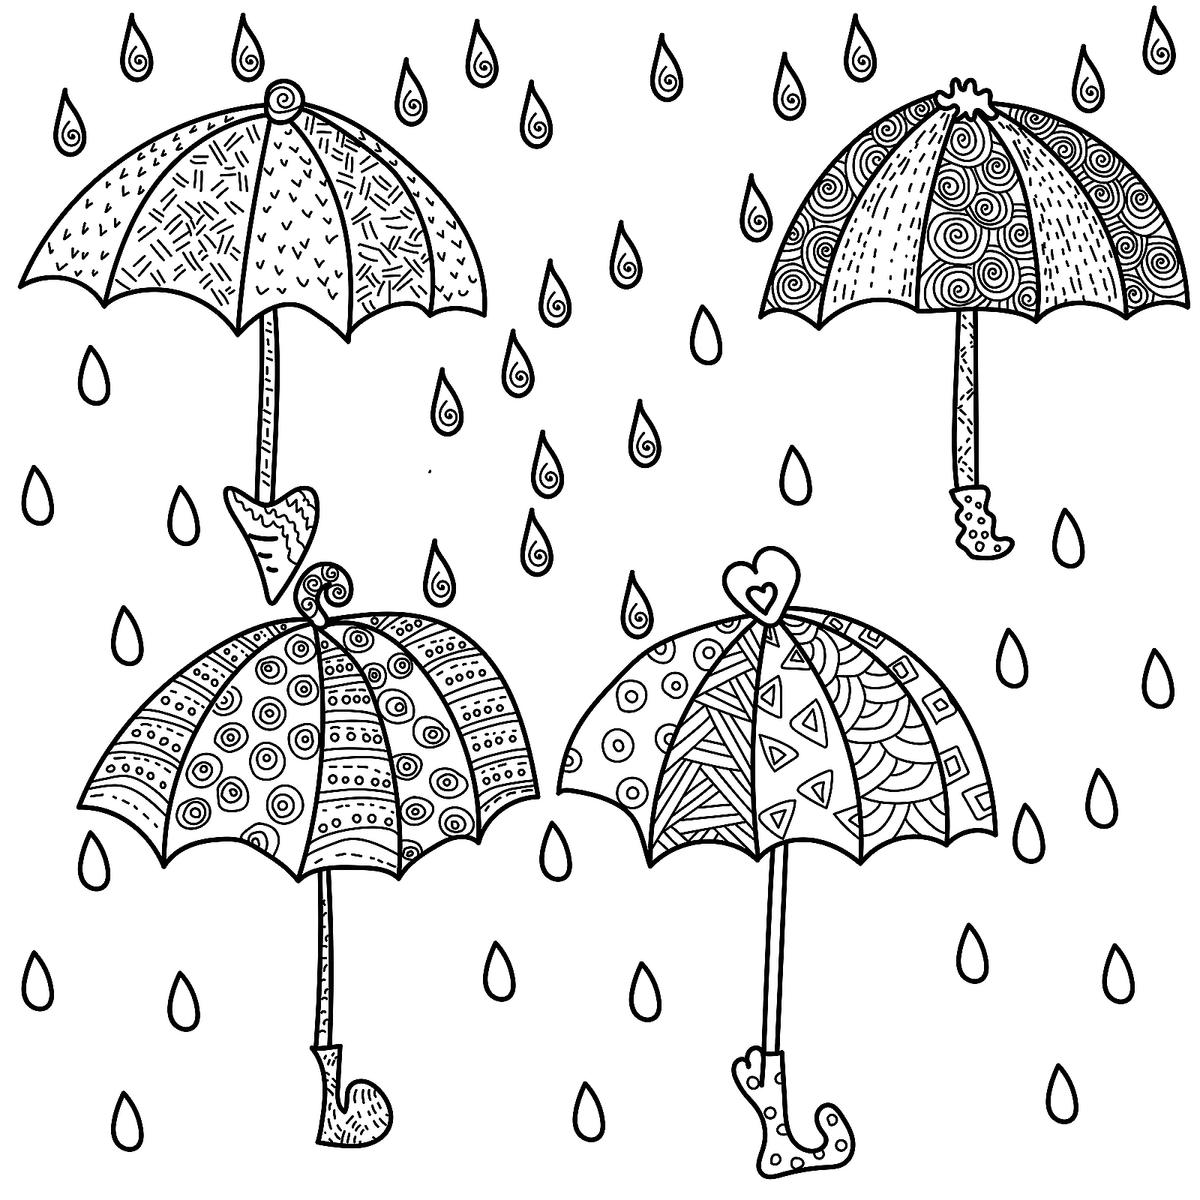 Weather coloring pages for kids fun free printable coloring pages of weather events â from hurricanes to sunny days printables mom